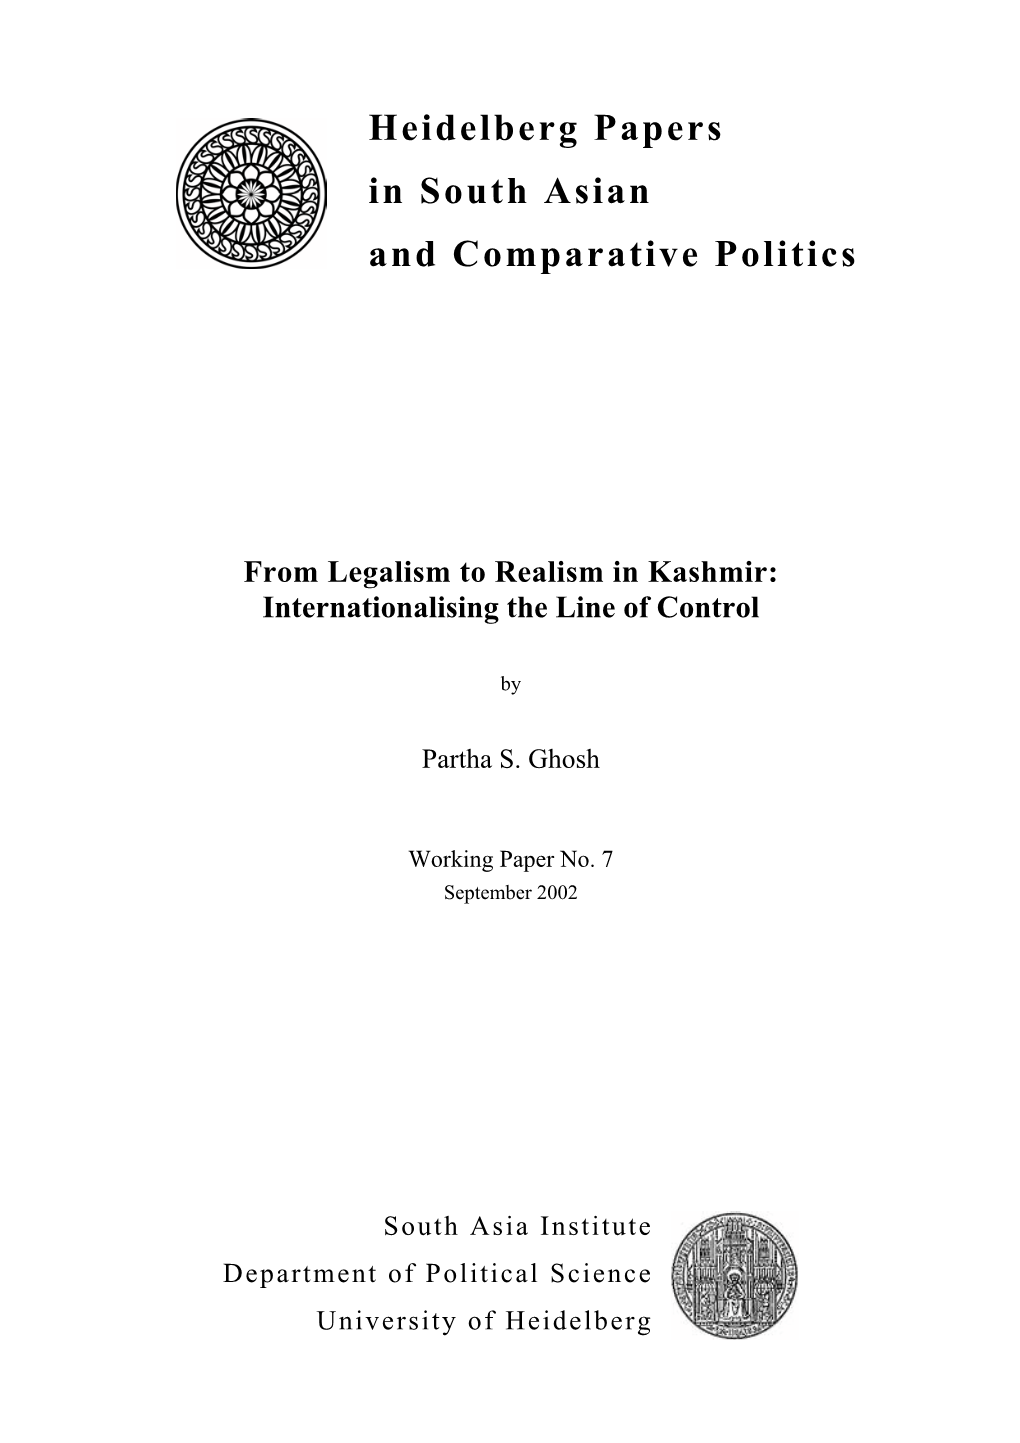 From Legalism to Realism in Kashmir: Internationalising the Line of Control